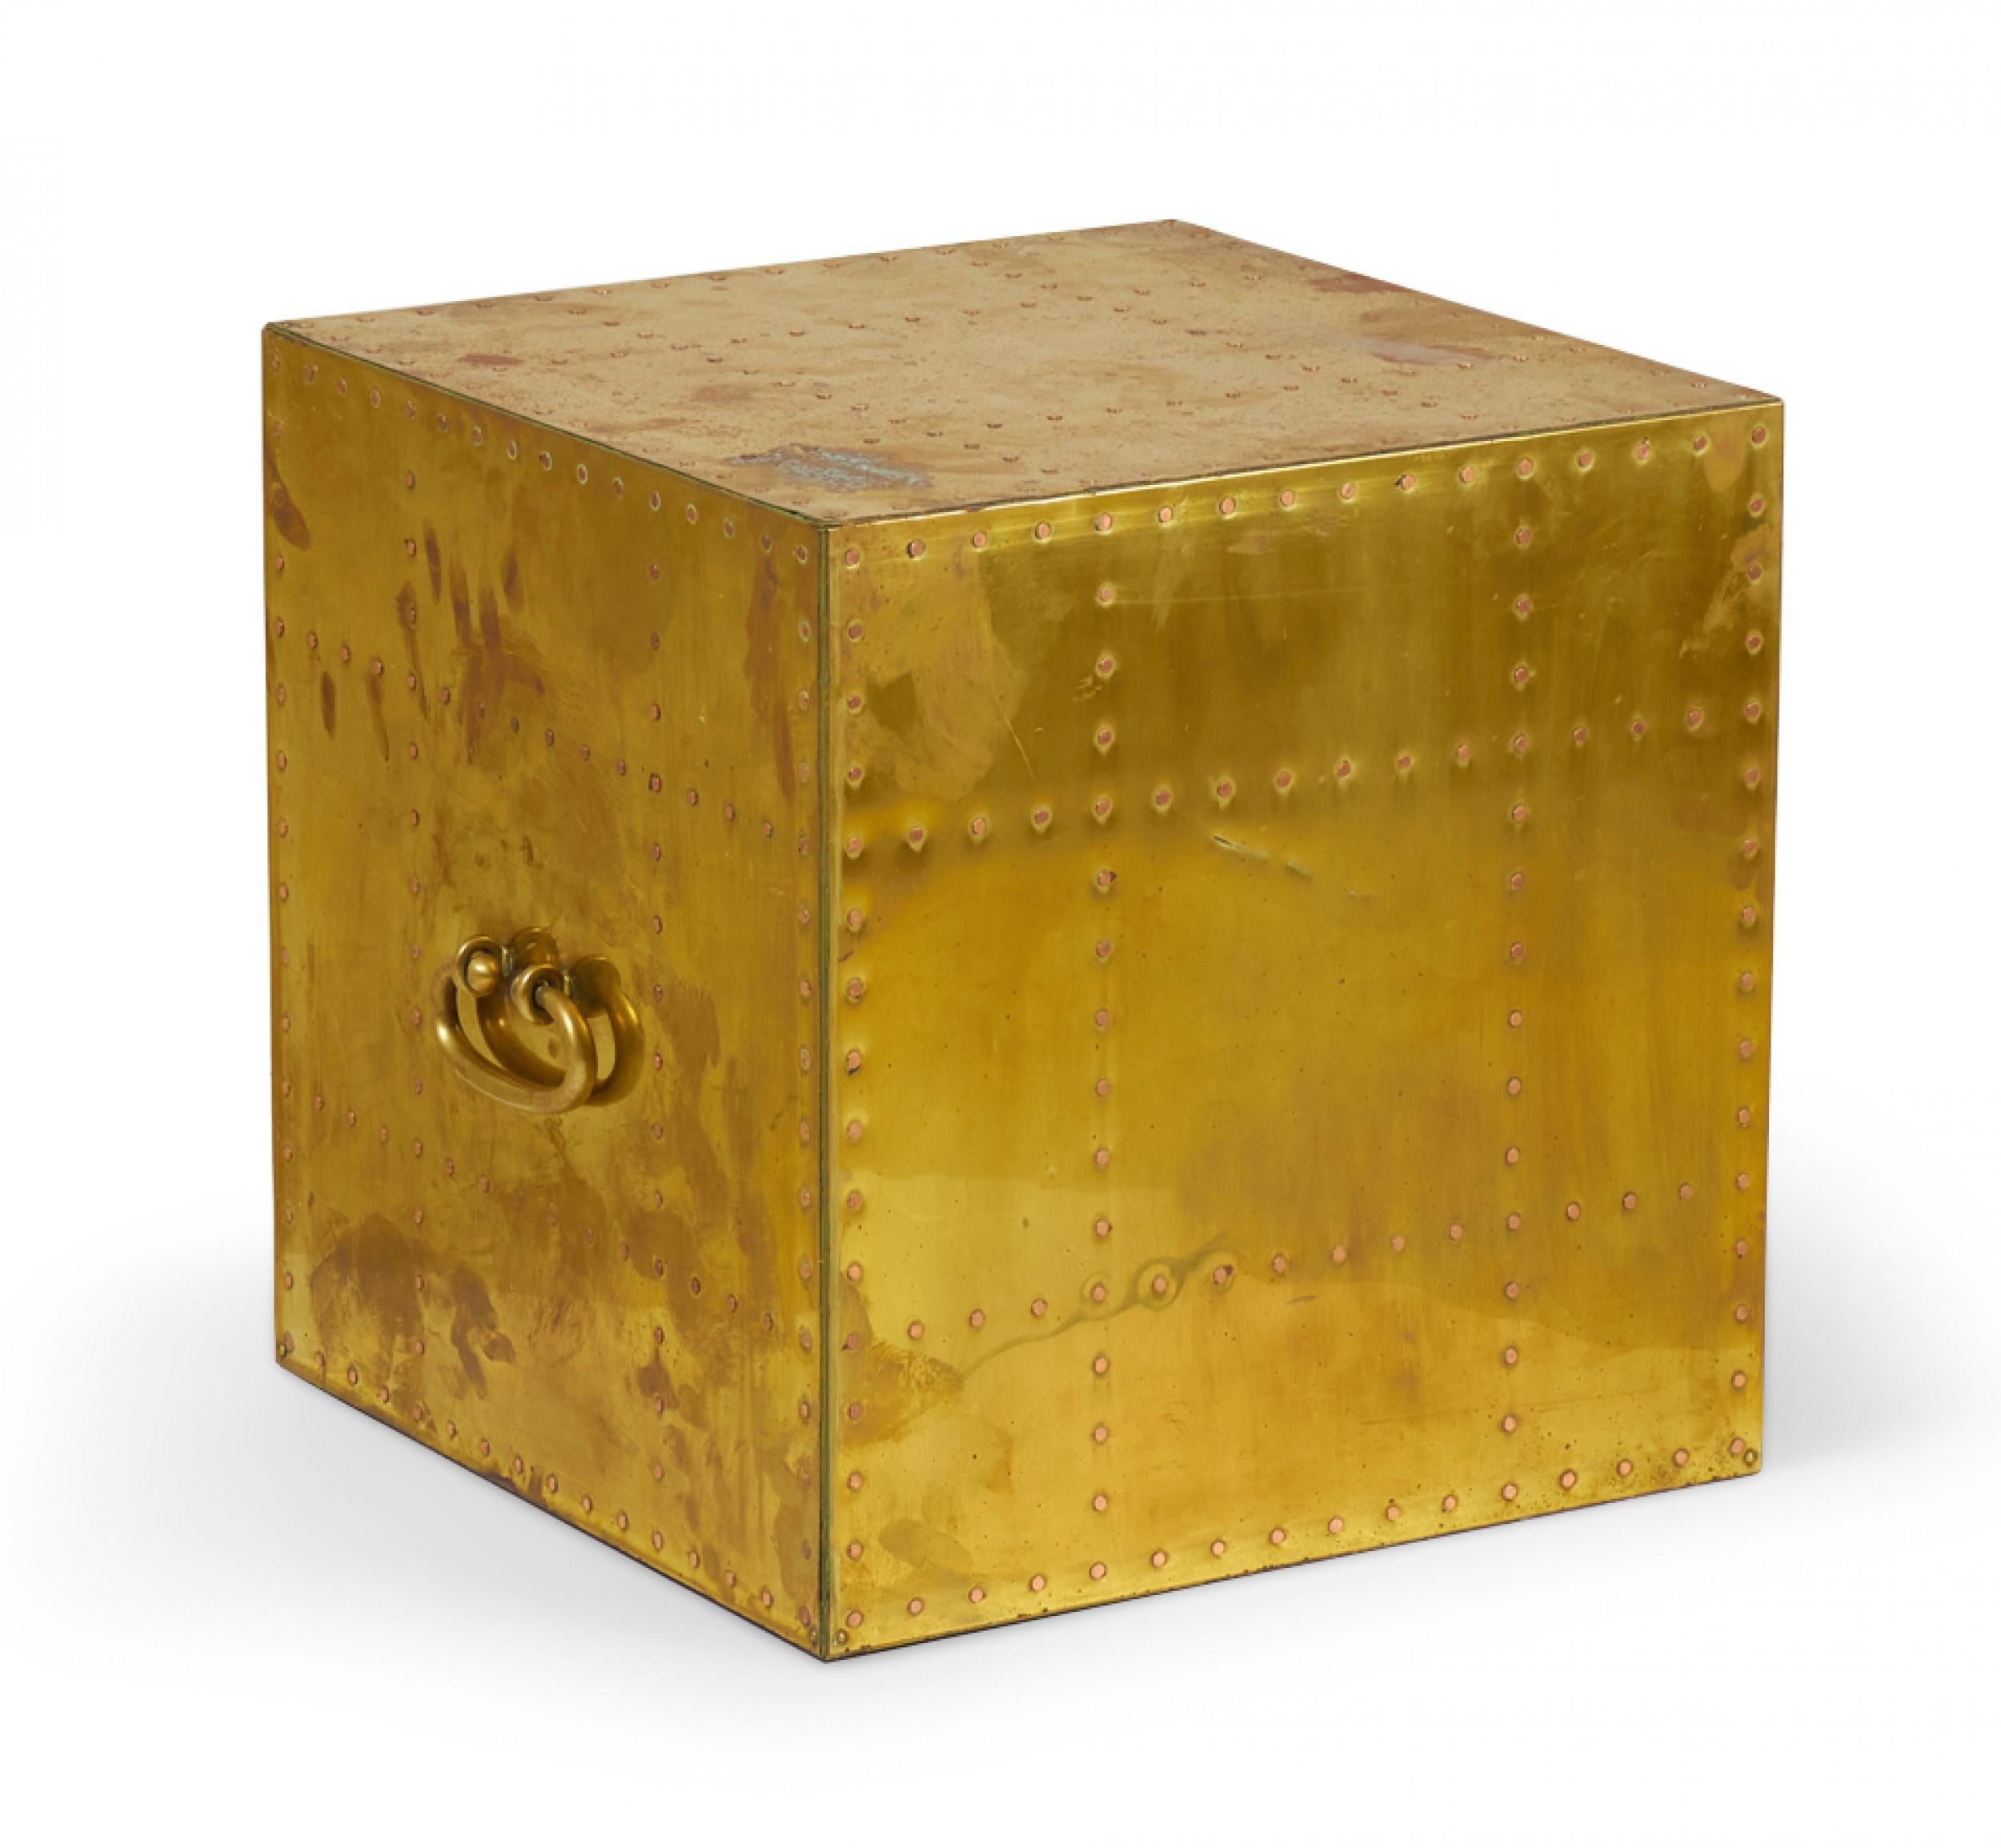 Spanish High Style brass cube occasional table with natural patina, copper studs, and two rounded brass handles. (SARREID, LTD)(Similar pieces available with different patinas: DUF0026A-F, similar commodes: DUF0025A-D)